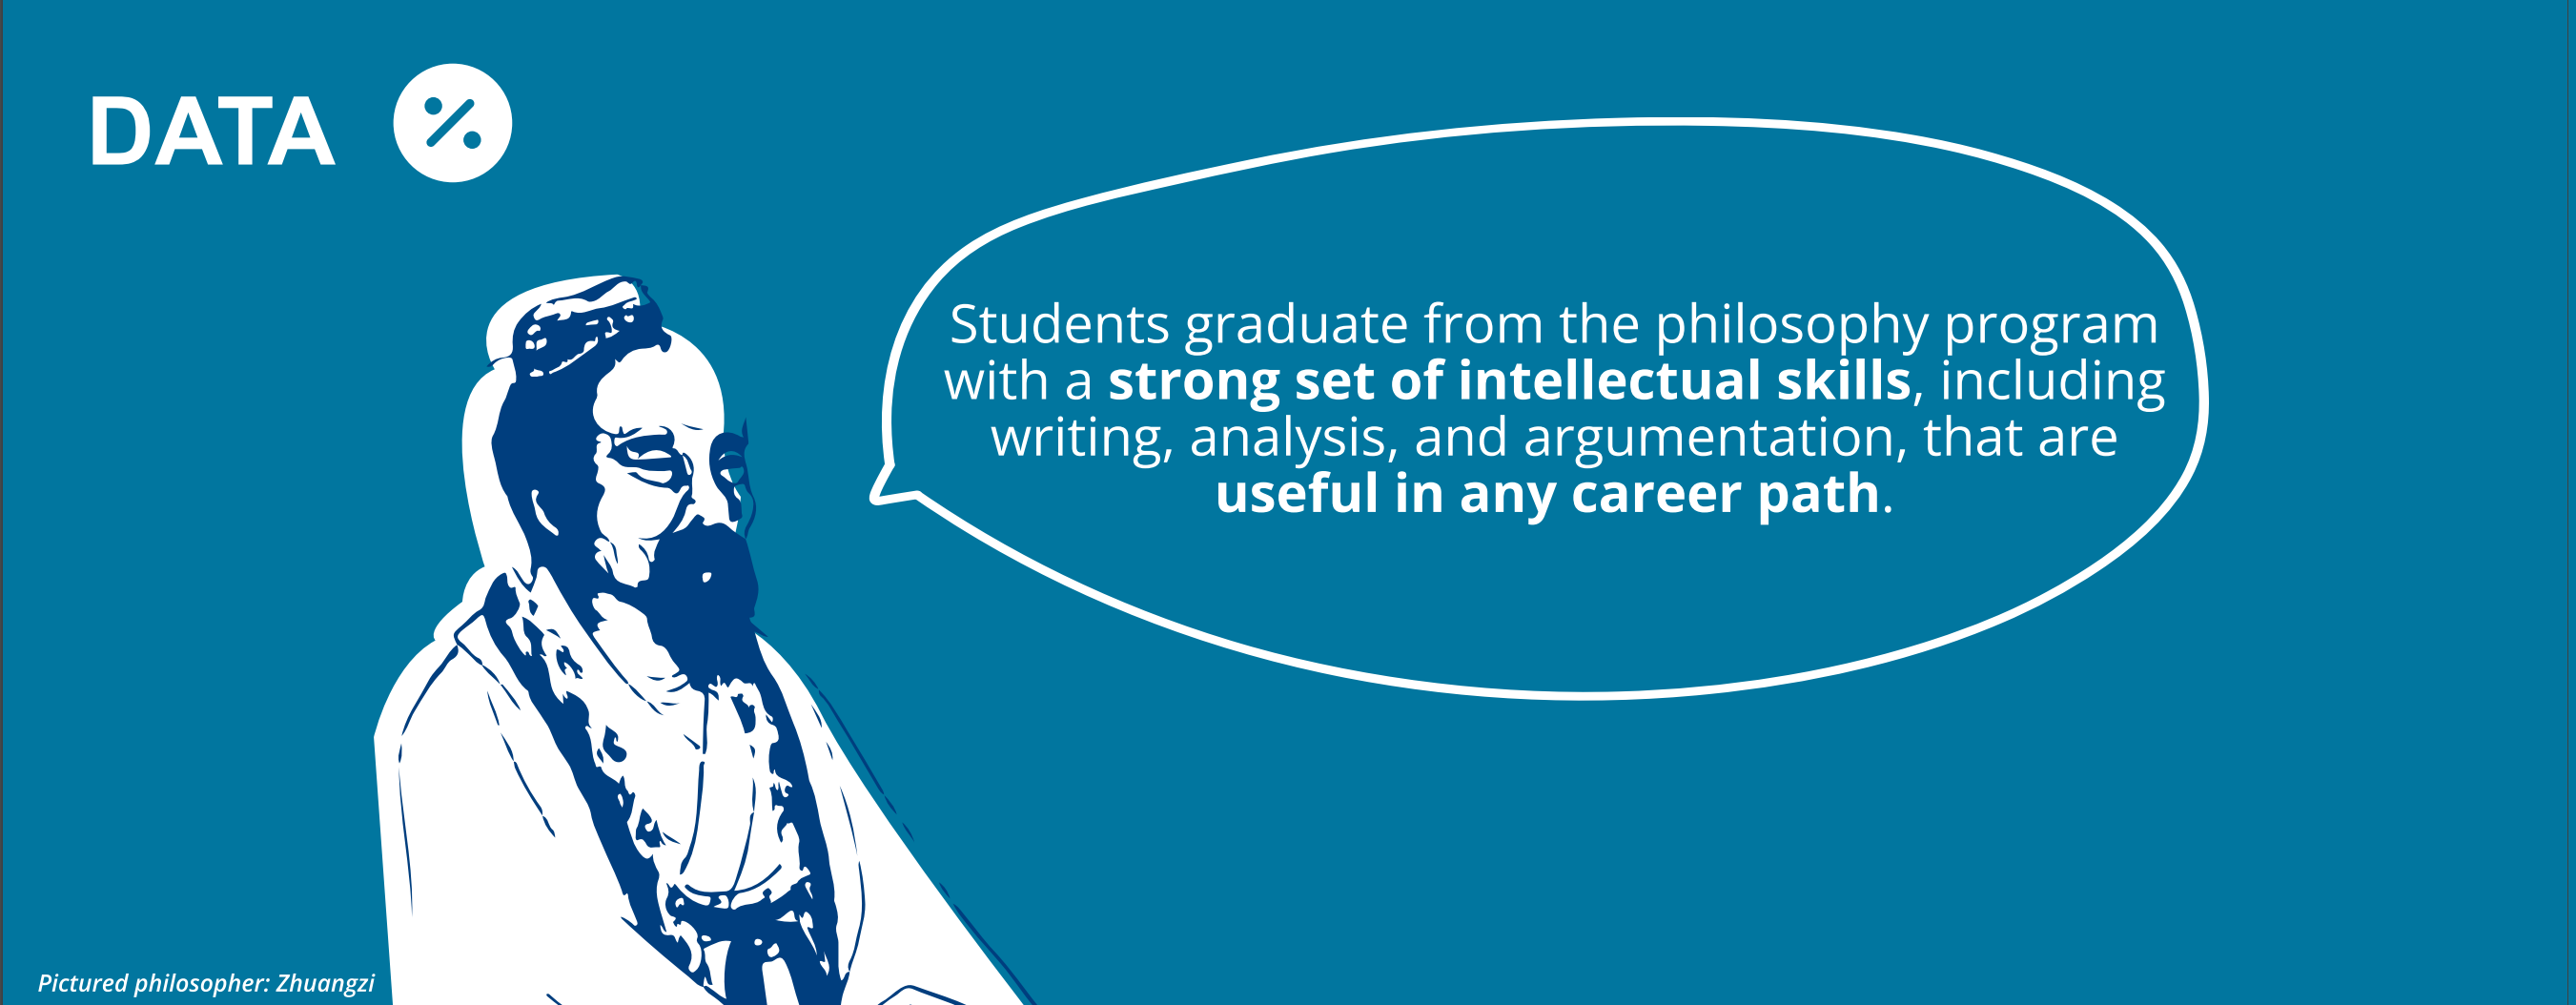 Students graduate from the philosophy program with a strong set of intellectual skills, including writing, analysis, and argumentation, that are useful in any career path.